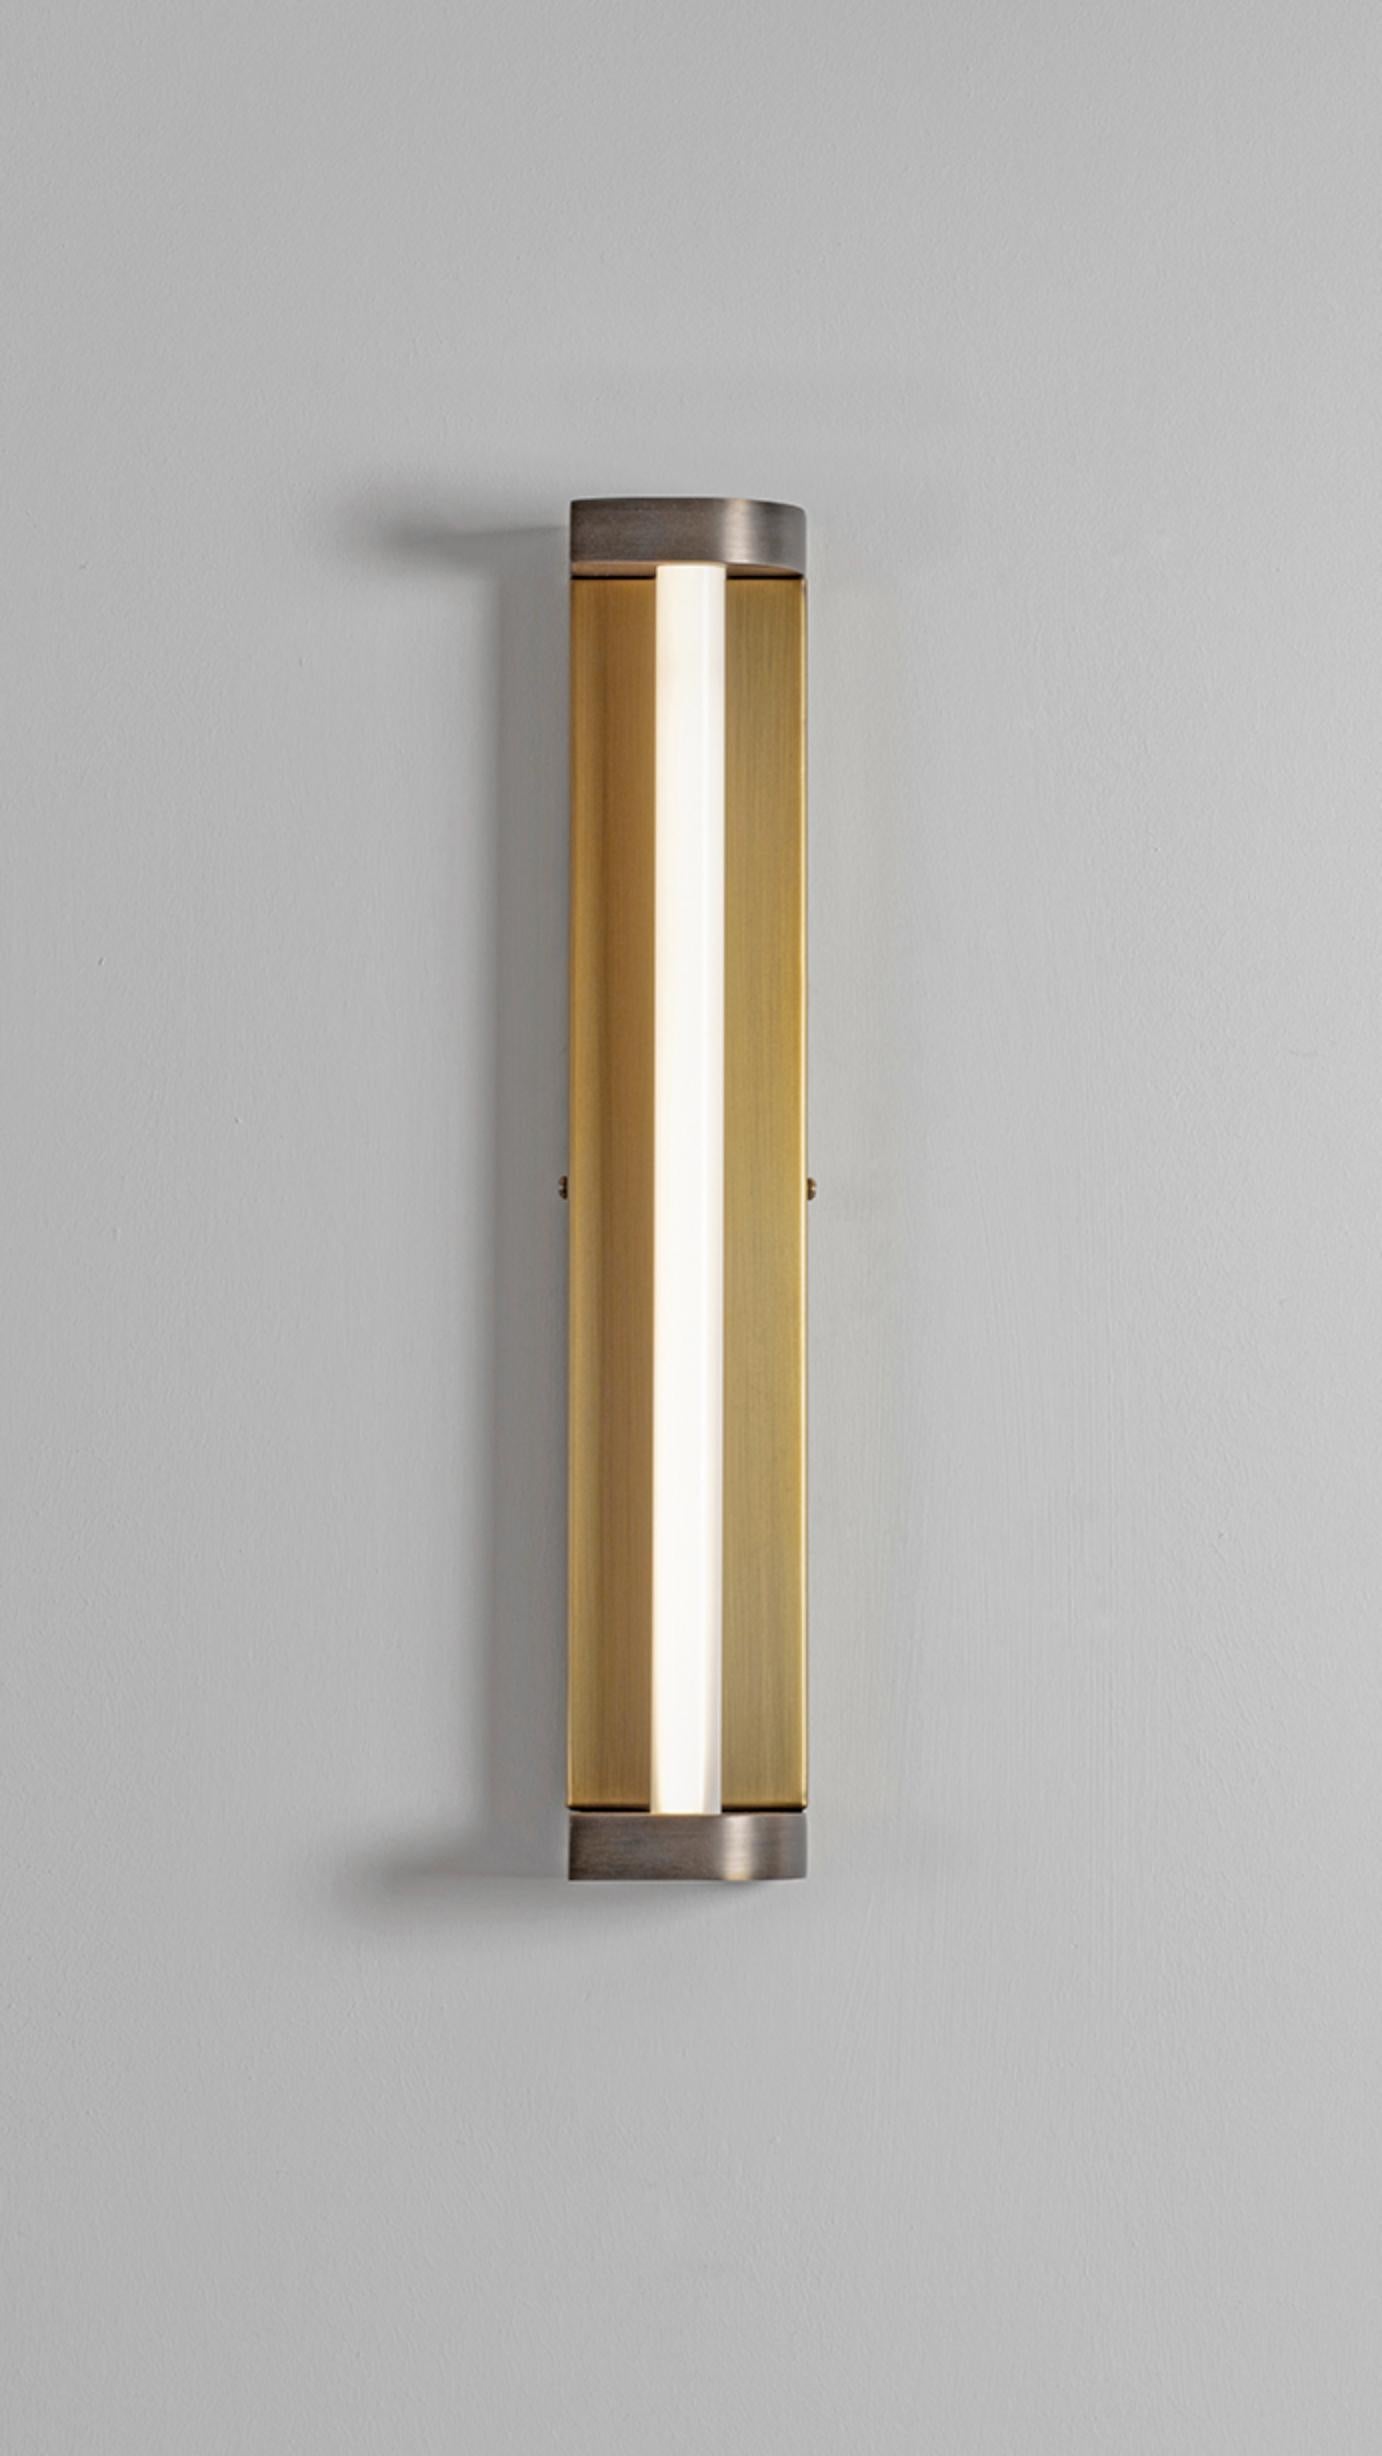 Rounded Corner Wall Light by Square in Circle
Dimensions: D 5 x W 7 x H 40 cm.
Materials:Brushed brass/ medium bronze/ opaque perspex
Other finishes available.

A tall, rectangular bathroom wall light with curved returns at top and bottom and an